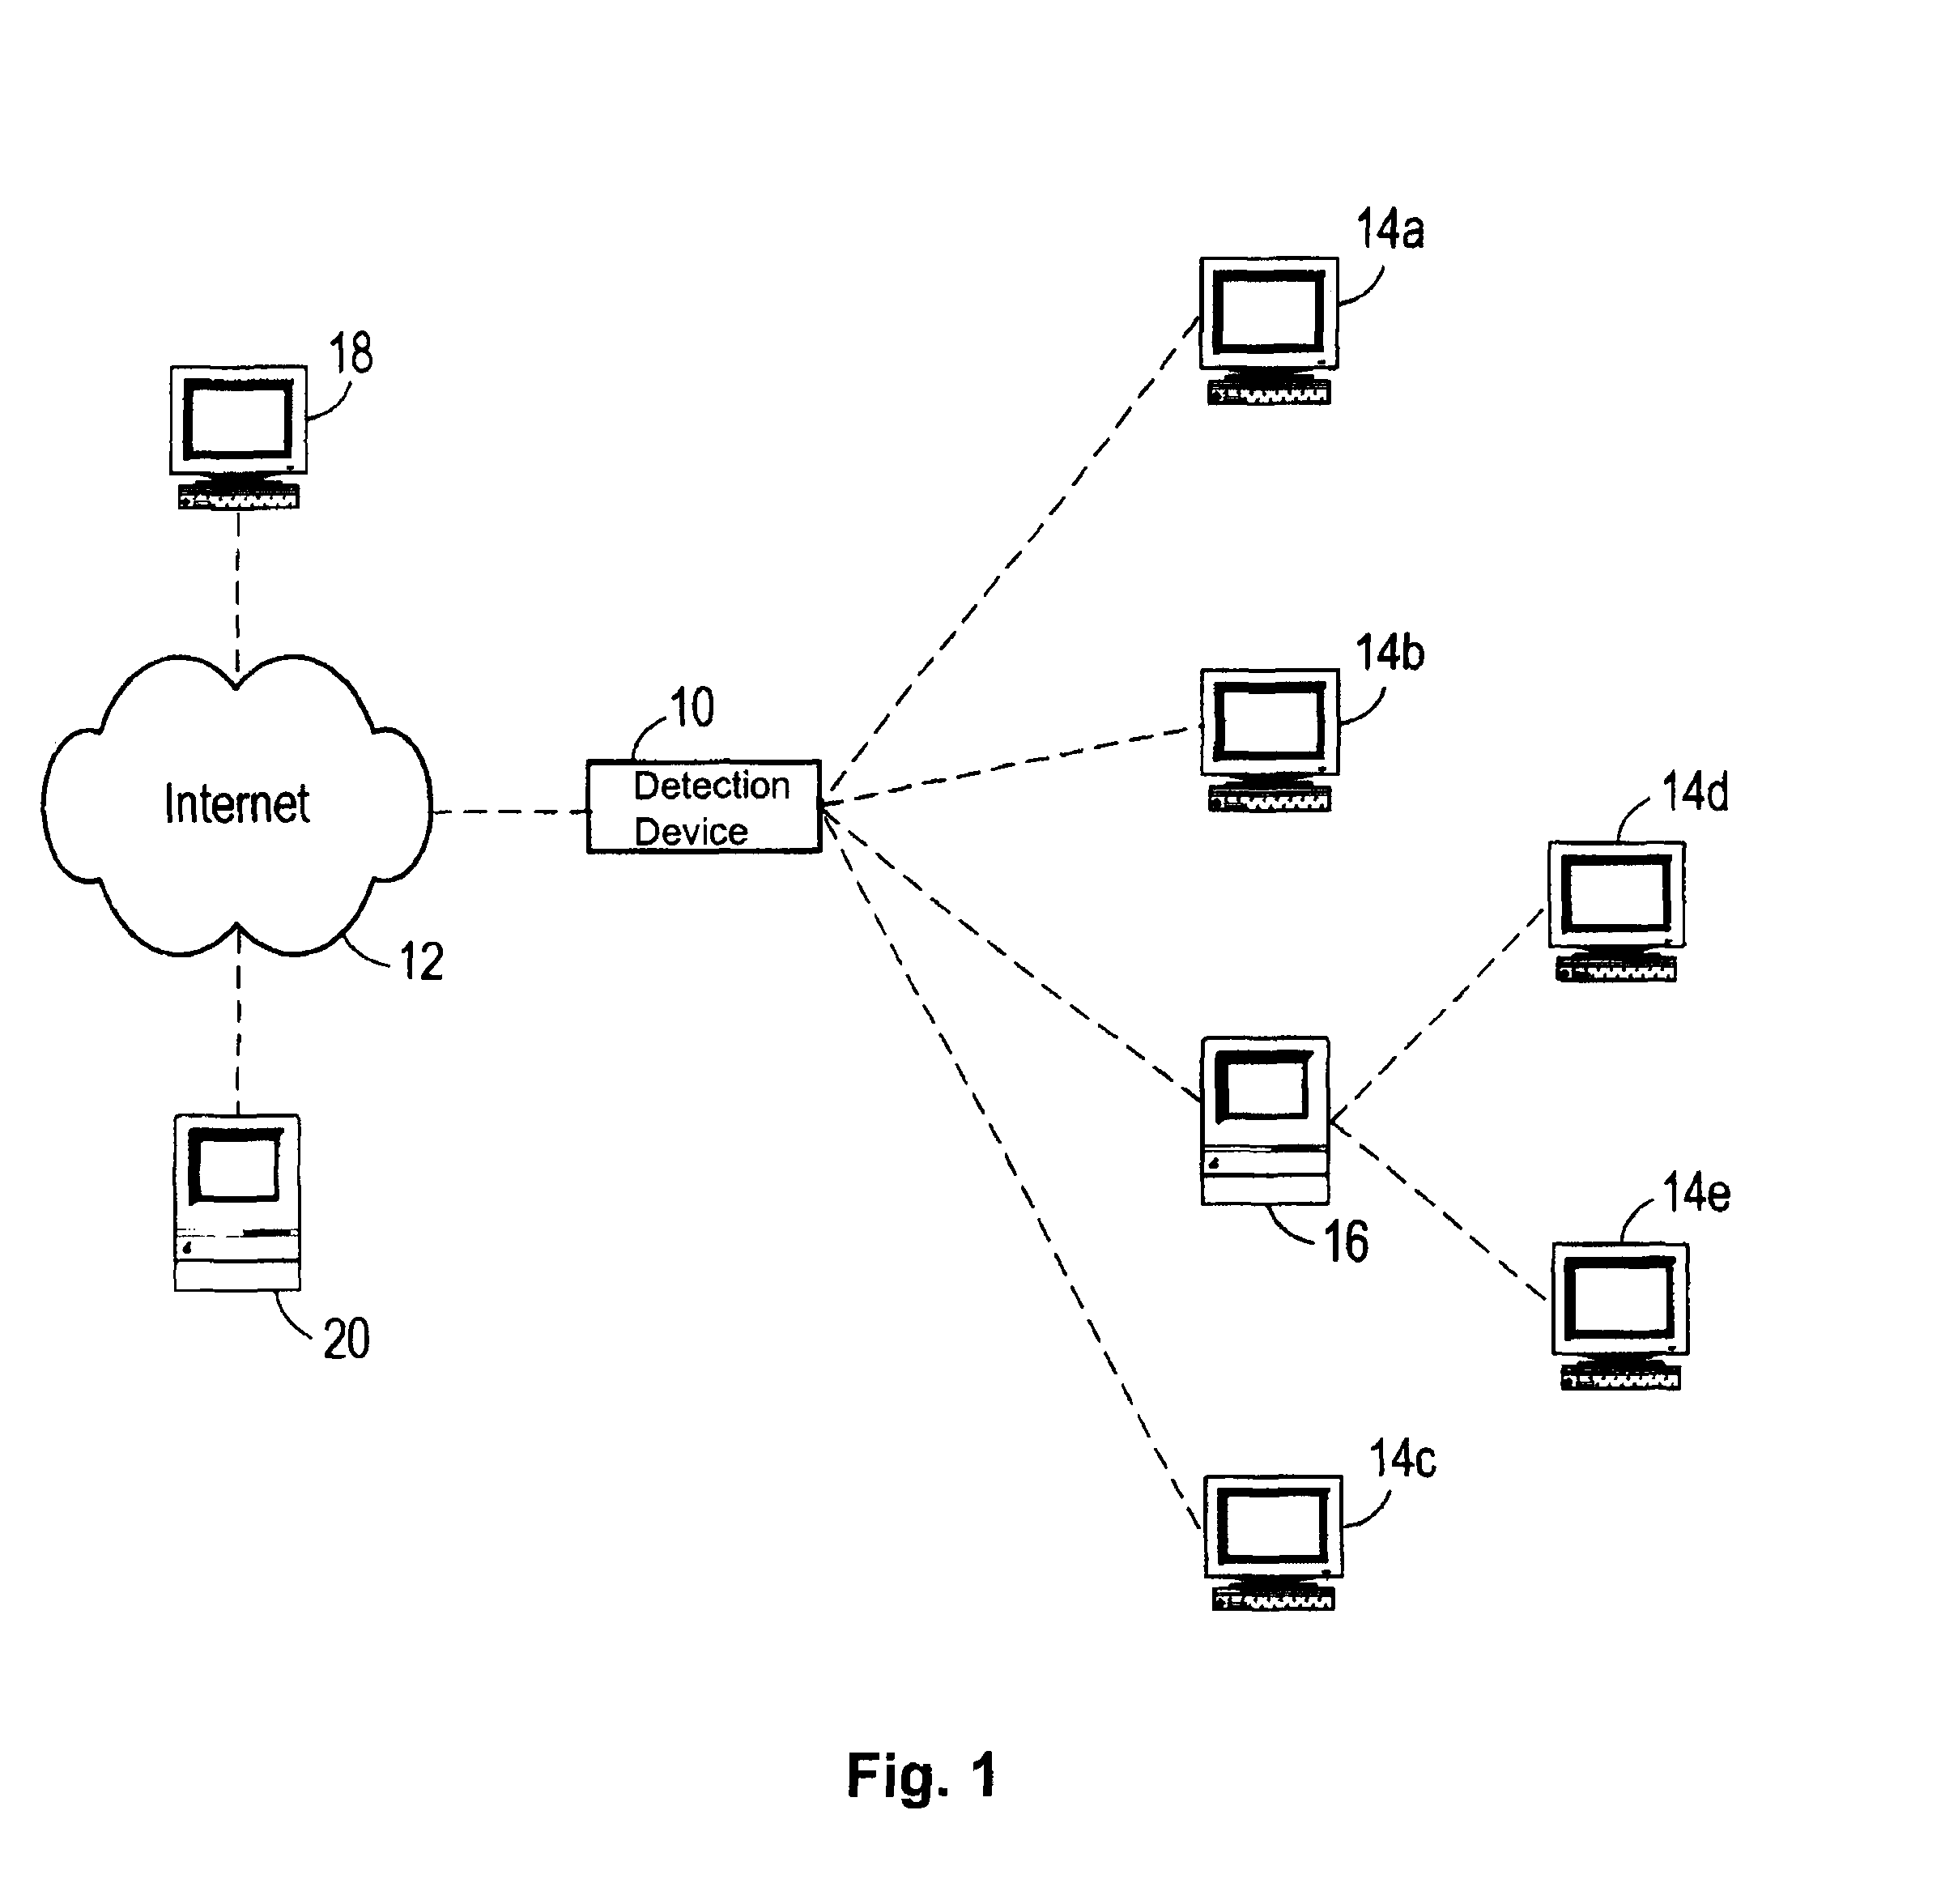 Content pattern recognition language processor and methods of using the same